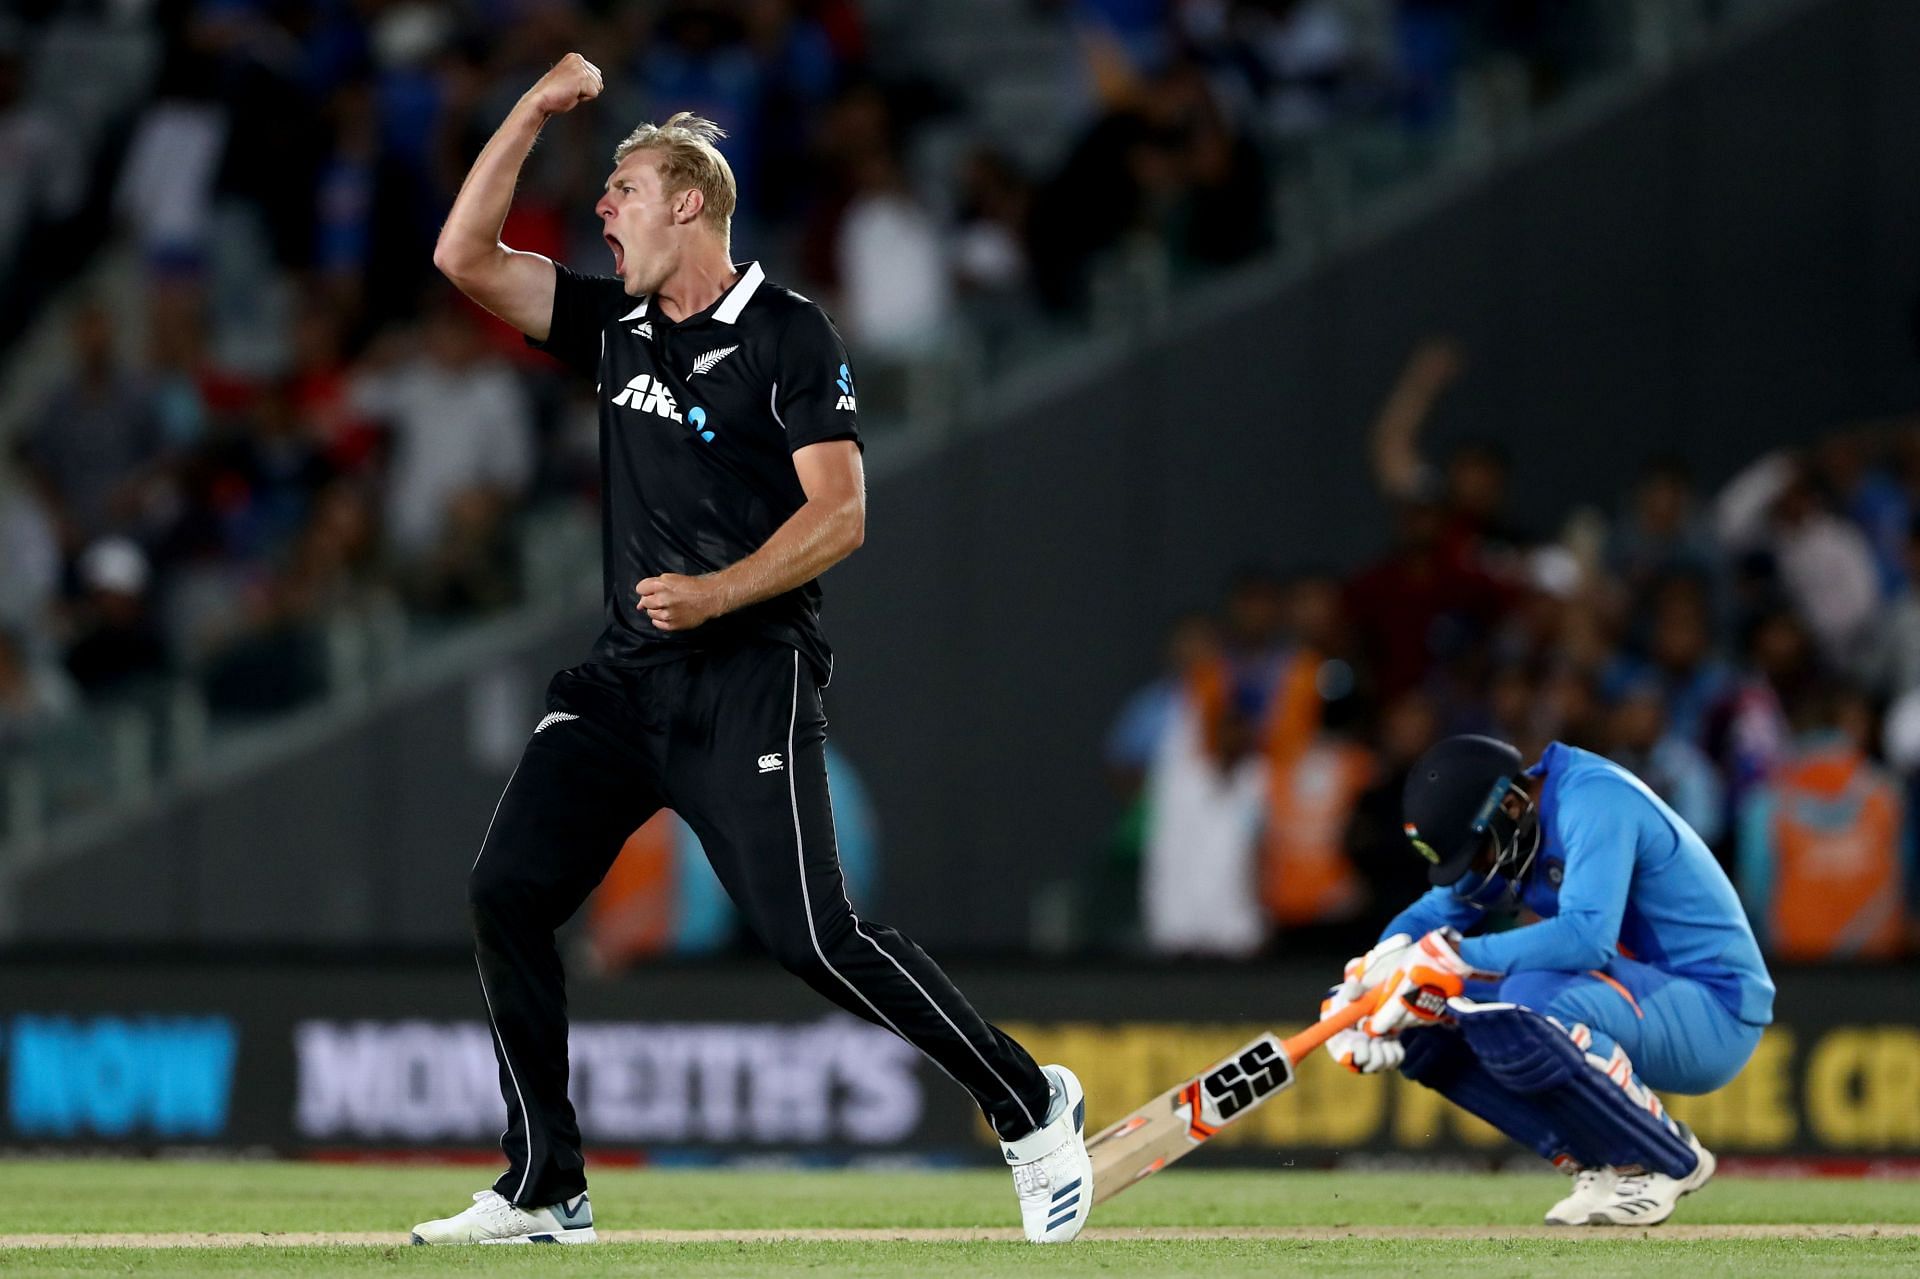 India suffered a 3-0 series whitewash against New Zealand in 2019.